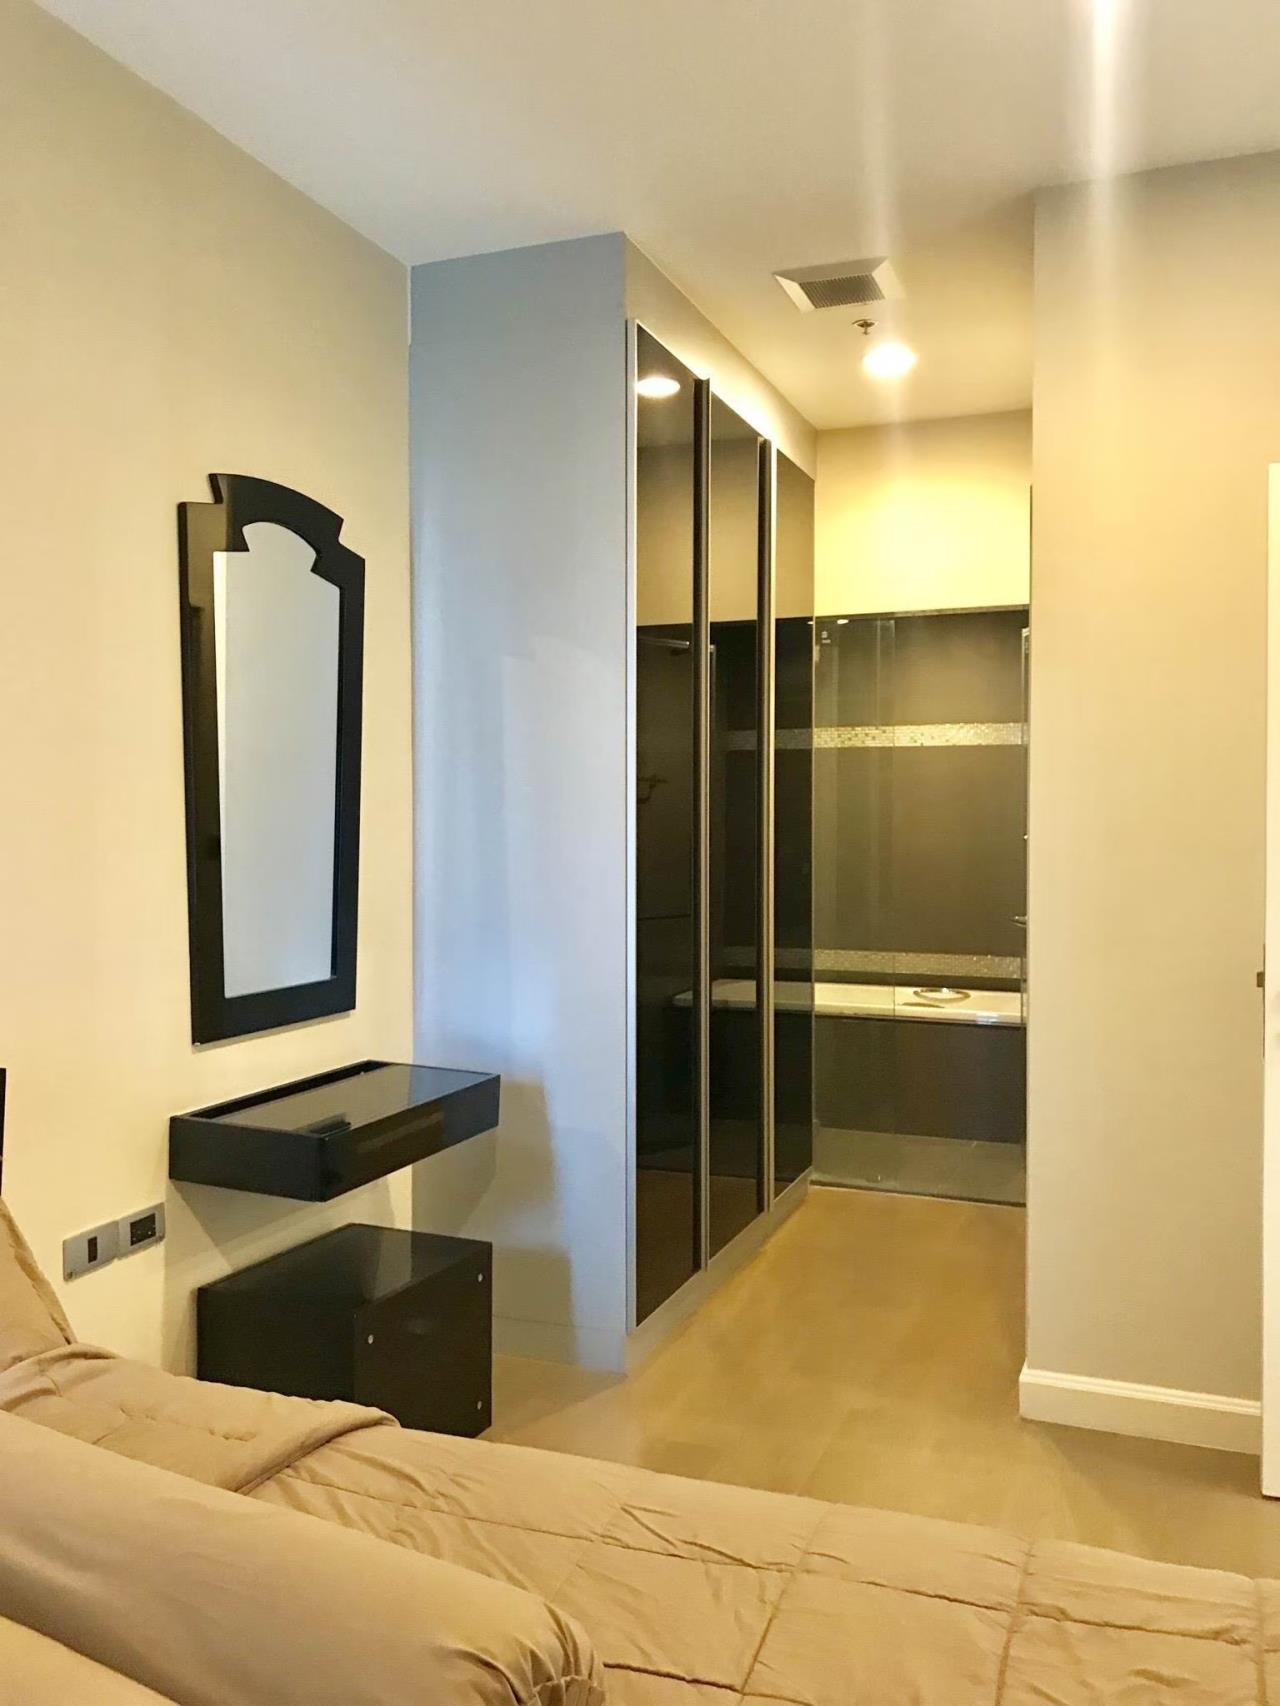 Blue Whale Property Agency's The Crest 34 Condominium for Rent { 1 Bedroom  1 Bathroom    45.39 SQ.M ฿25,000/month} Near by BTS Thonglor 1